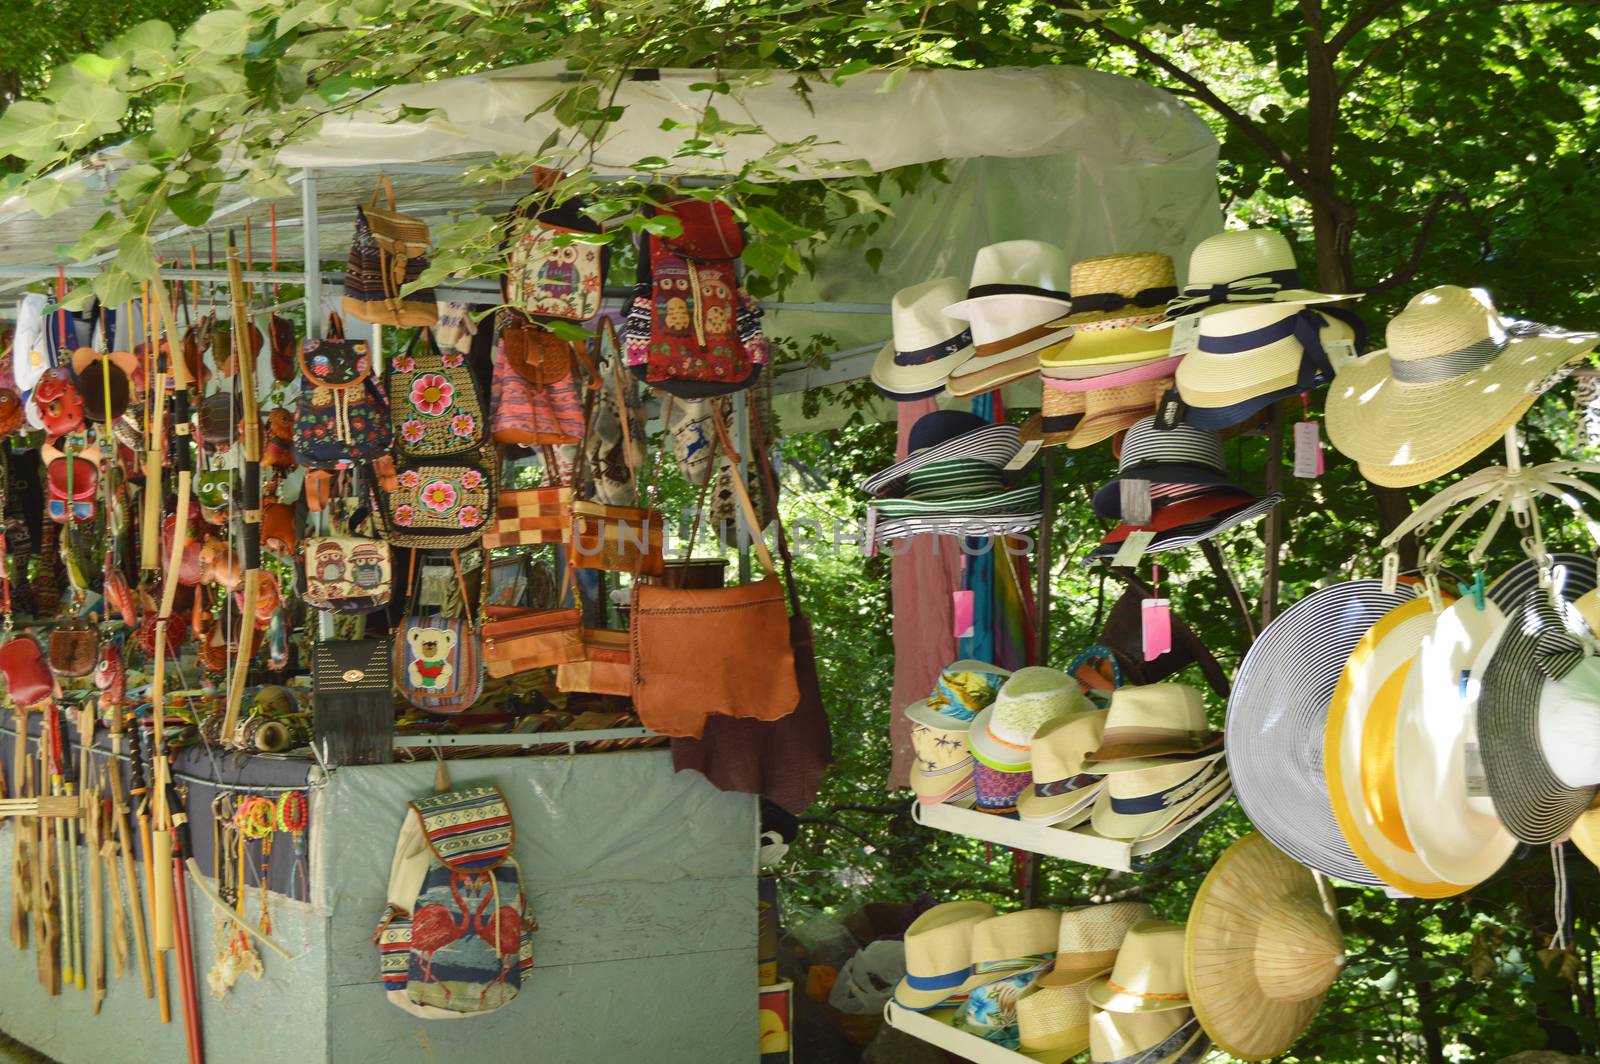 Outdoor souvenir kiosk in the Park with tourist goods hats, bags, backpacks and various accessories.